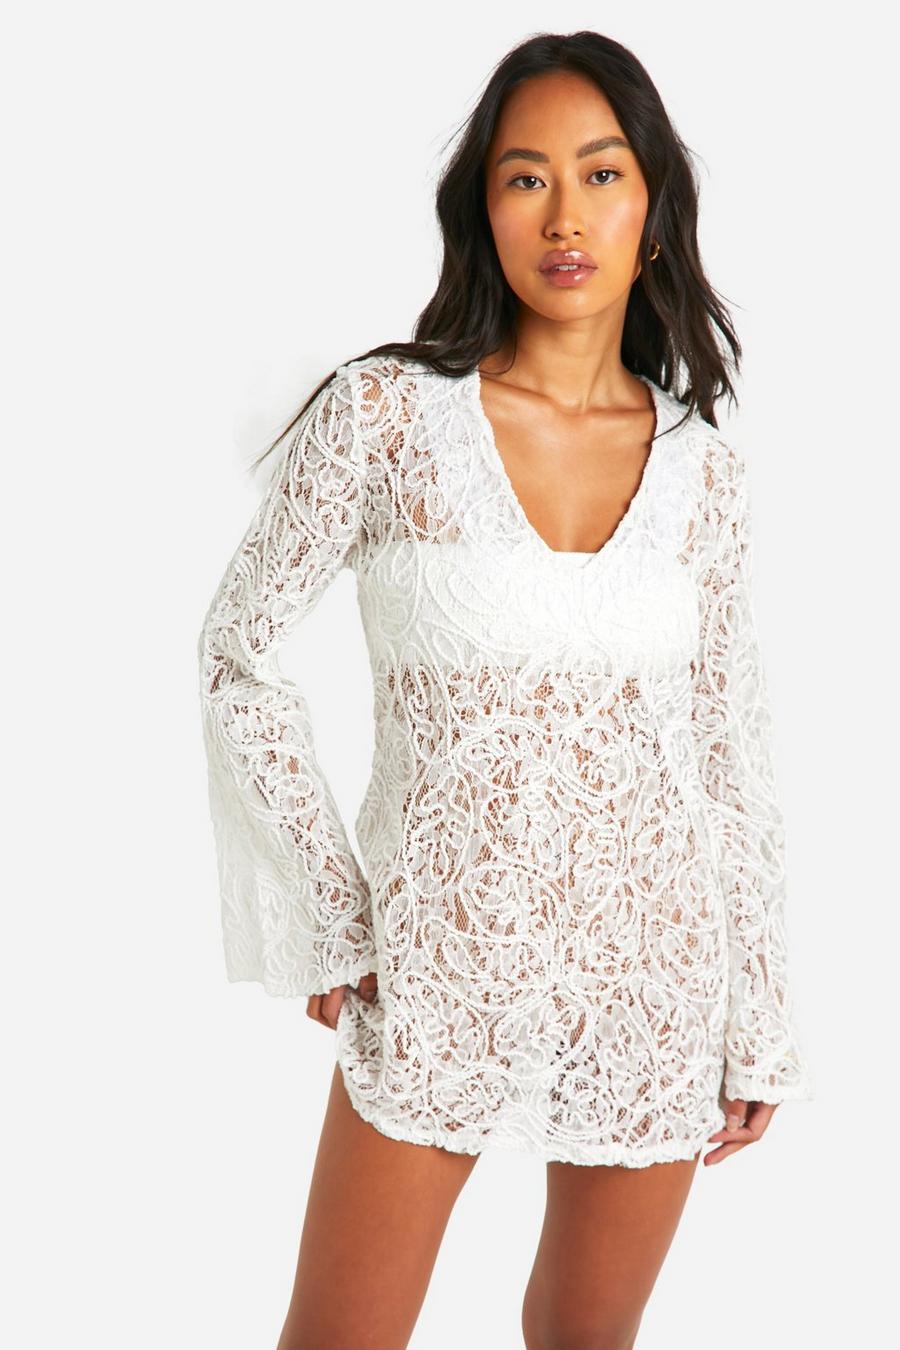 White Premium Embossed Lace Crochet Beach Cover-up Dress